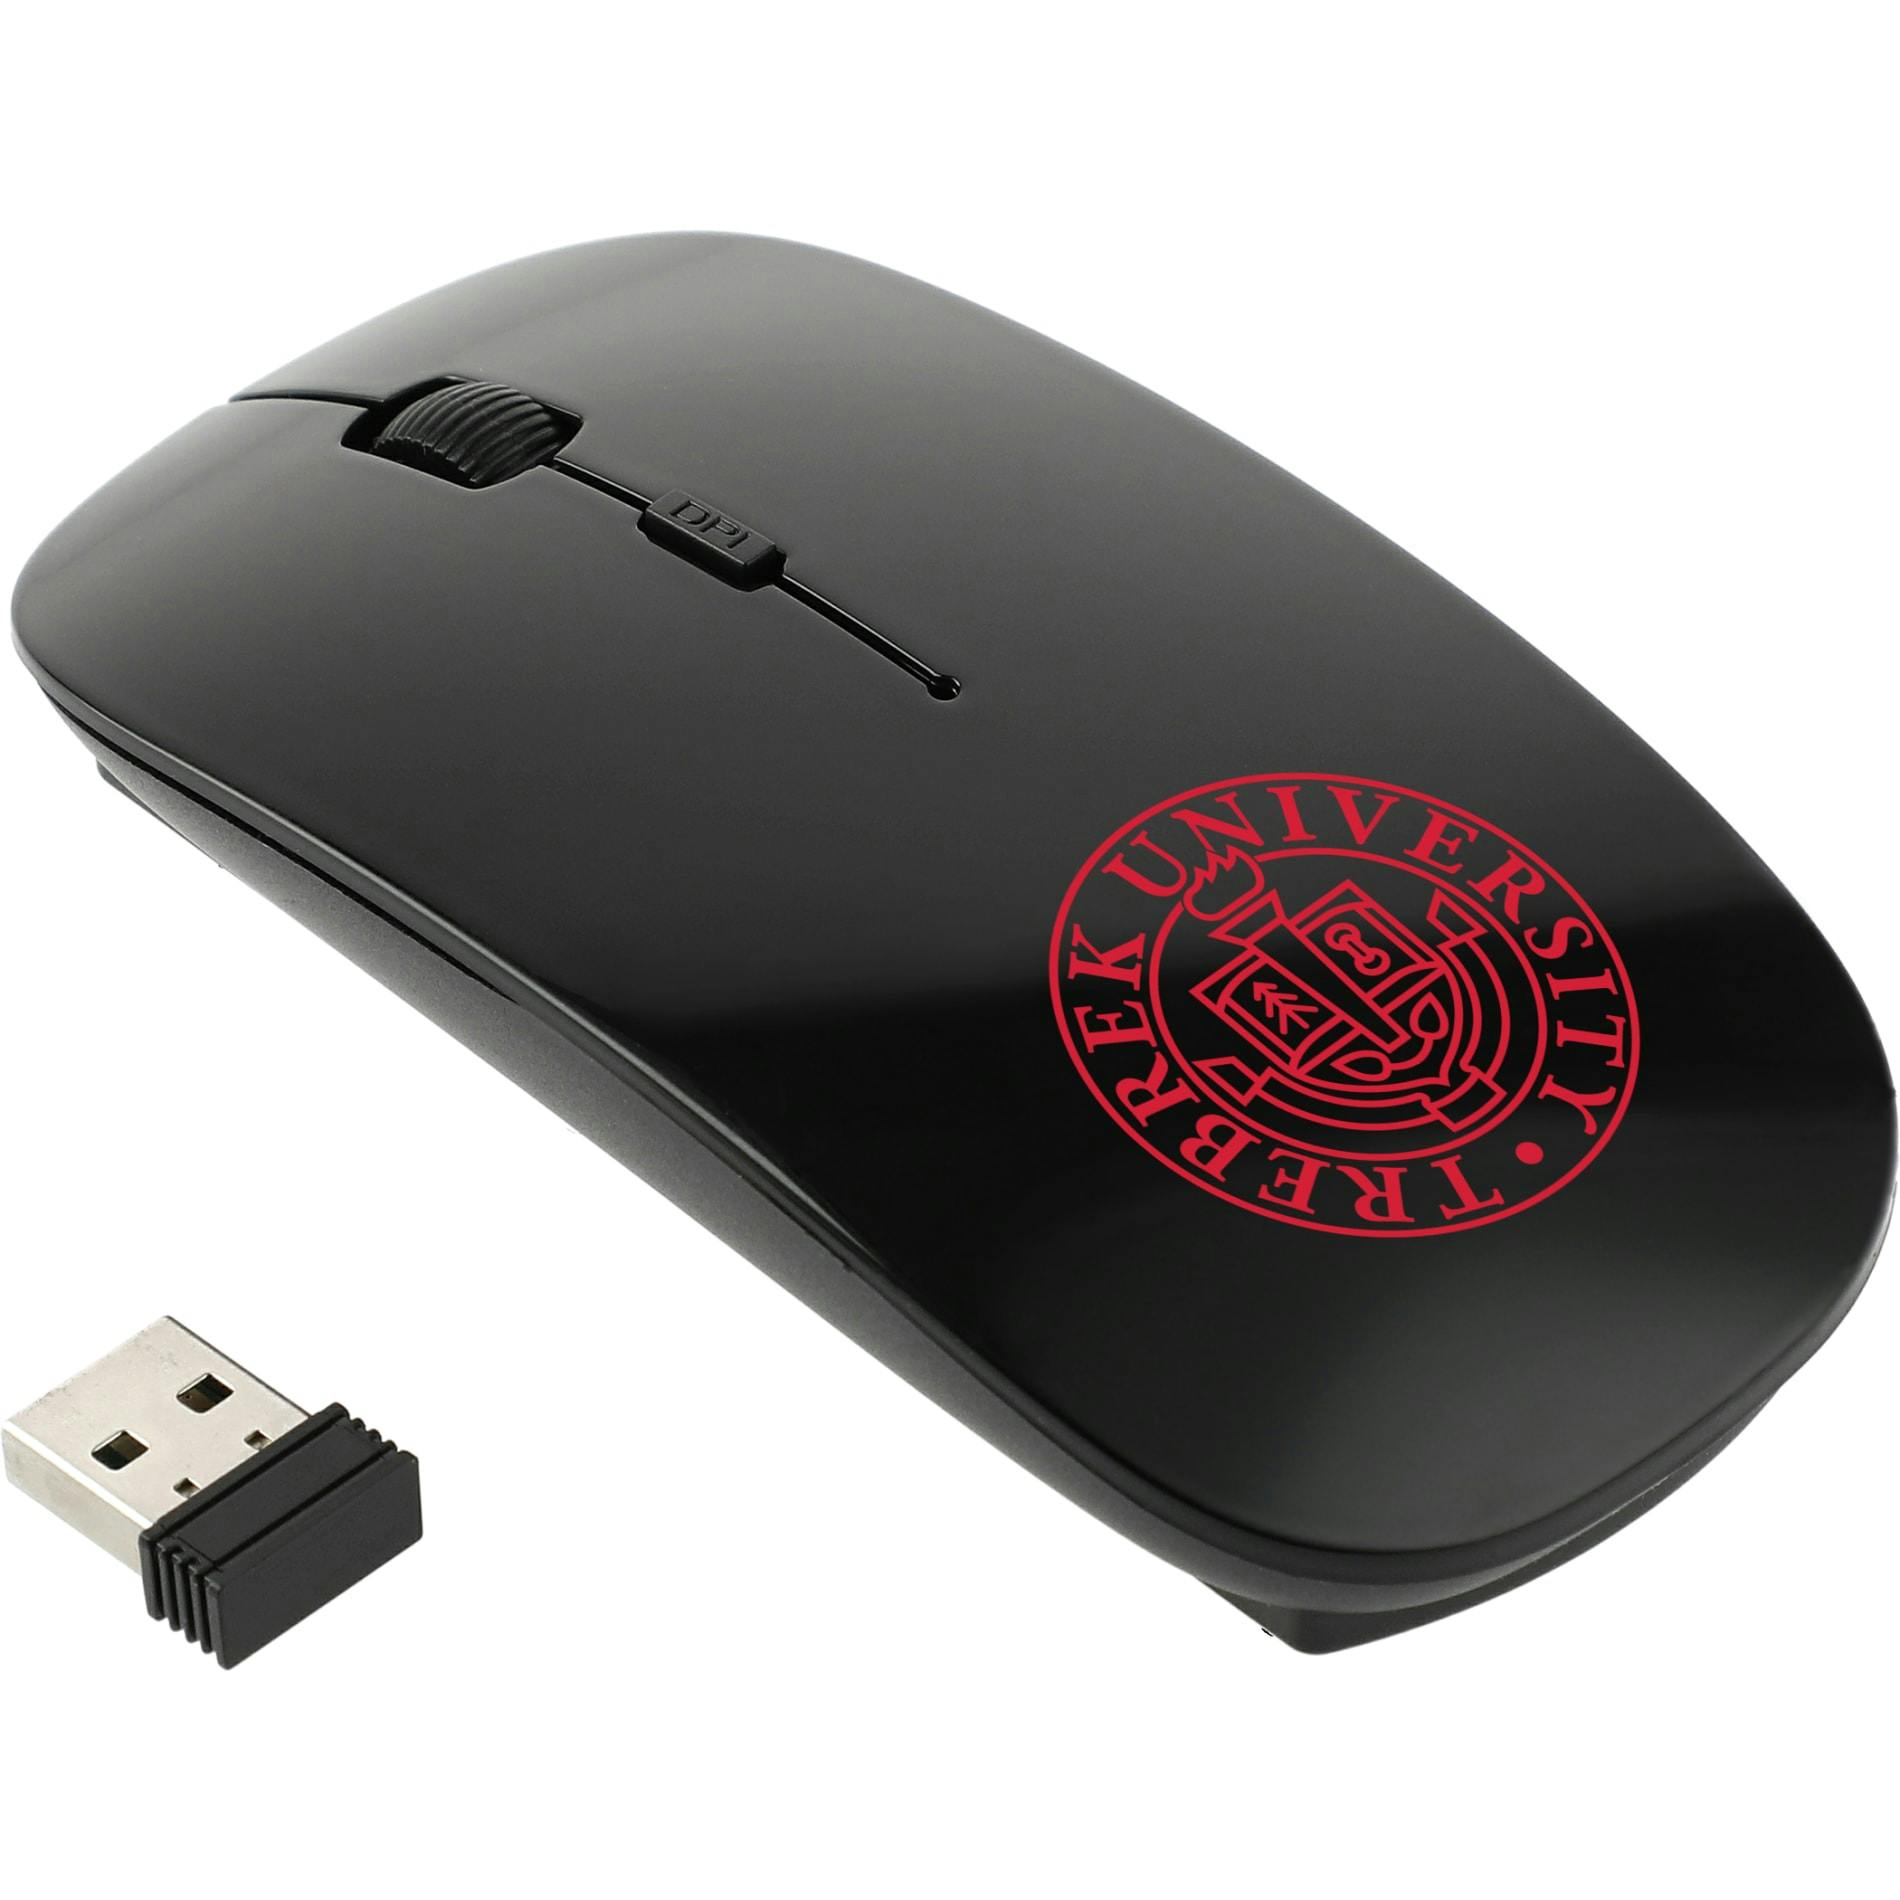 Accel Portable Wireless Mouse and Pad - additional Image 4